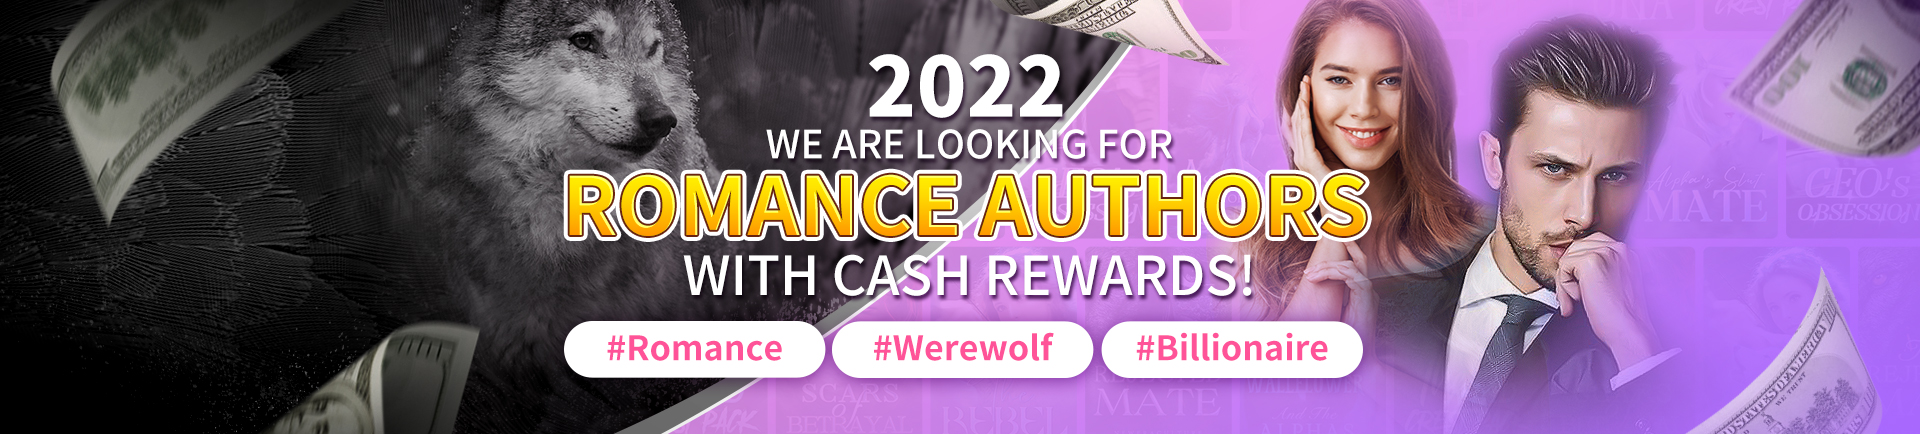 We are looking for ROMANCE AUTHORS with cash rewards